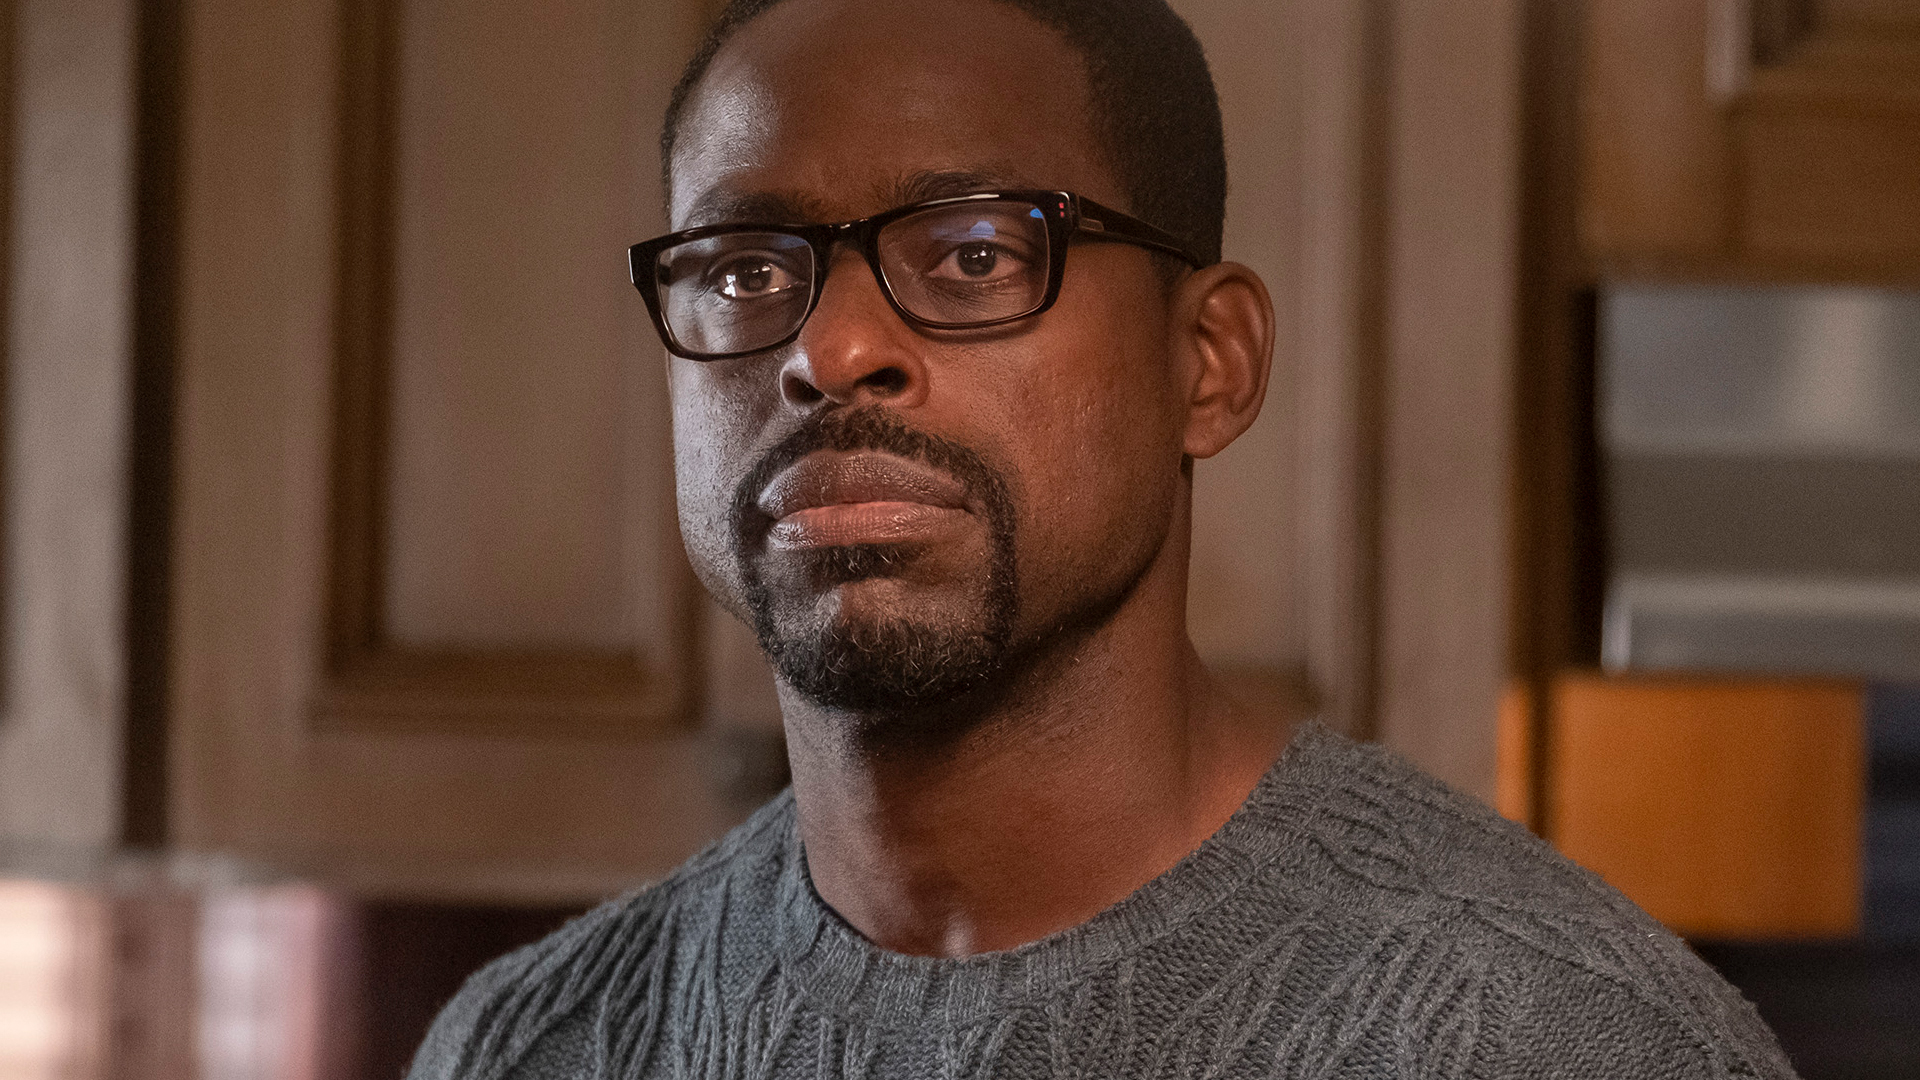 Sterling K. Brown as Randall on 'This Is Us' Season 4 Episode 9